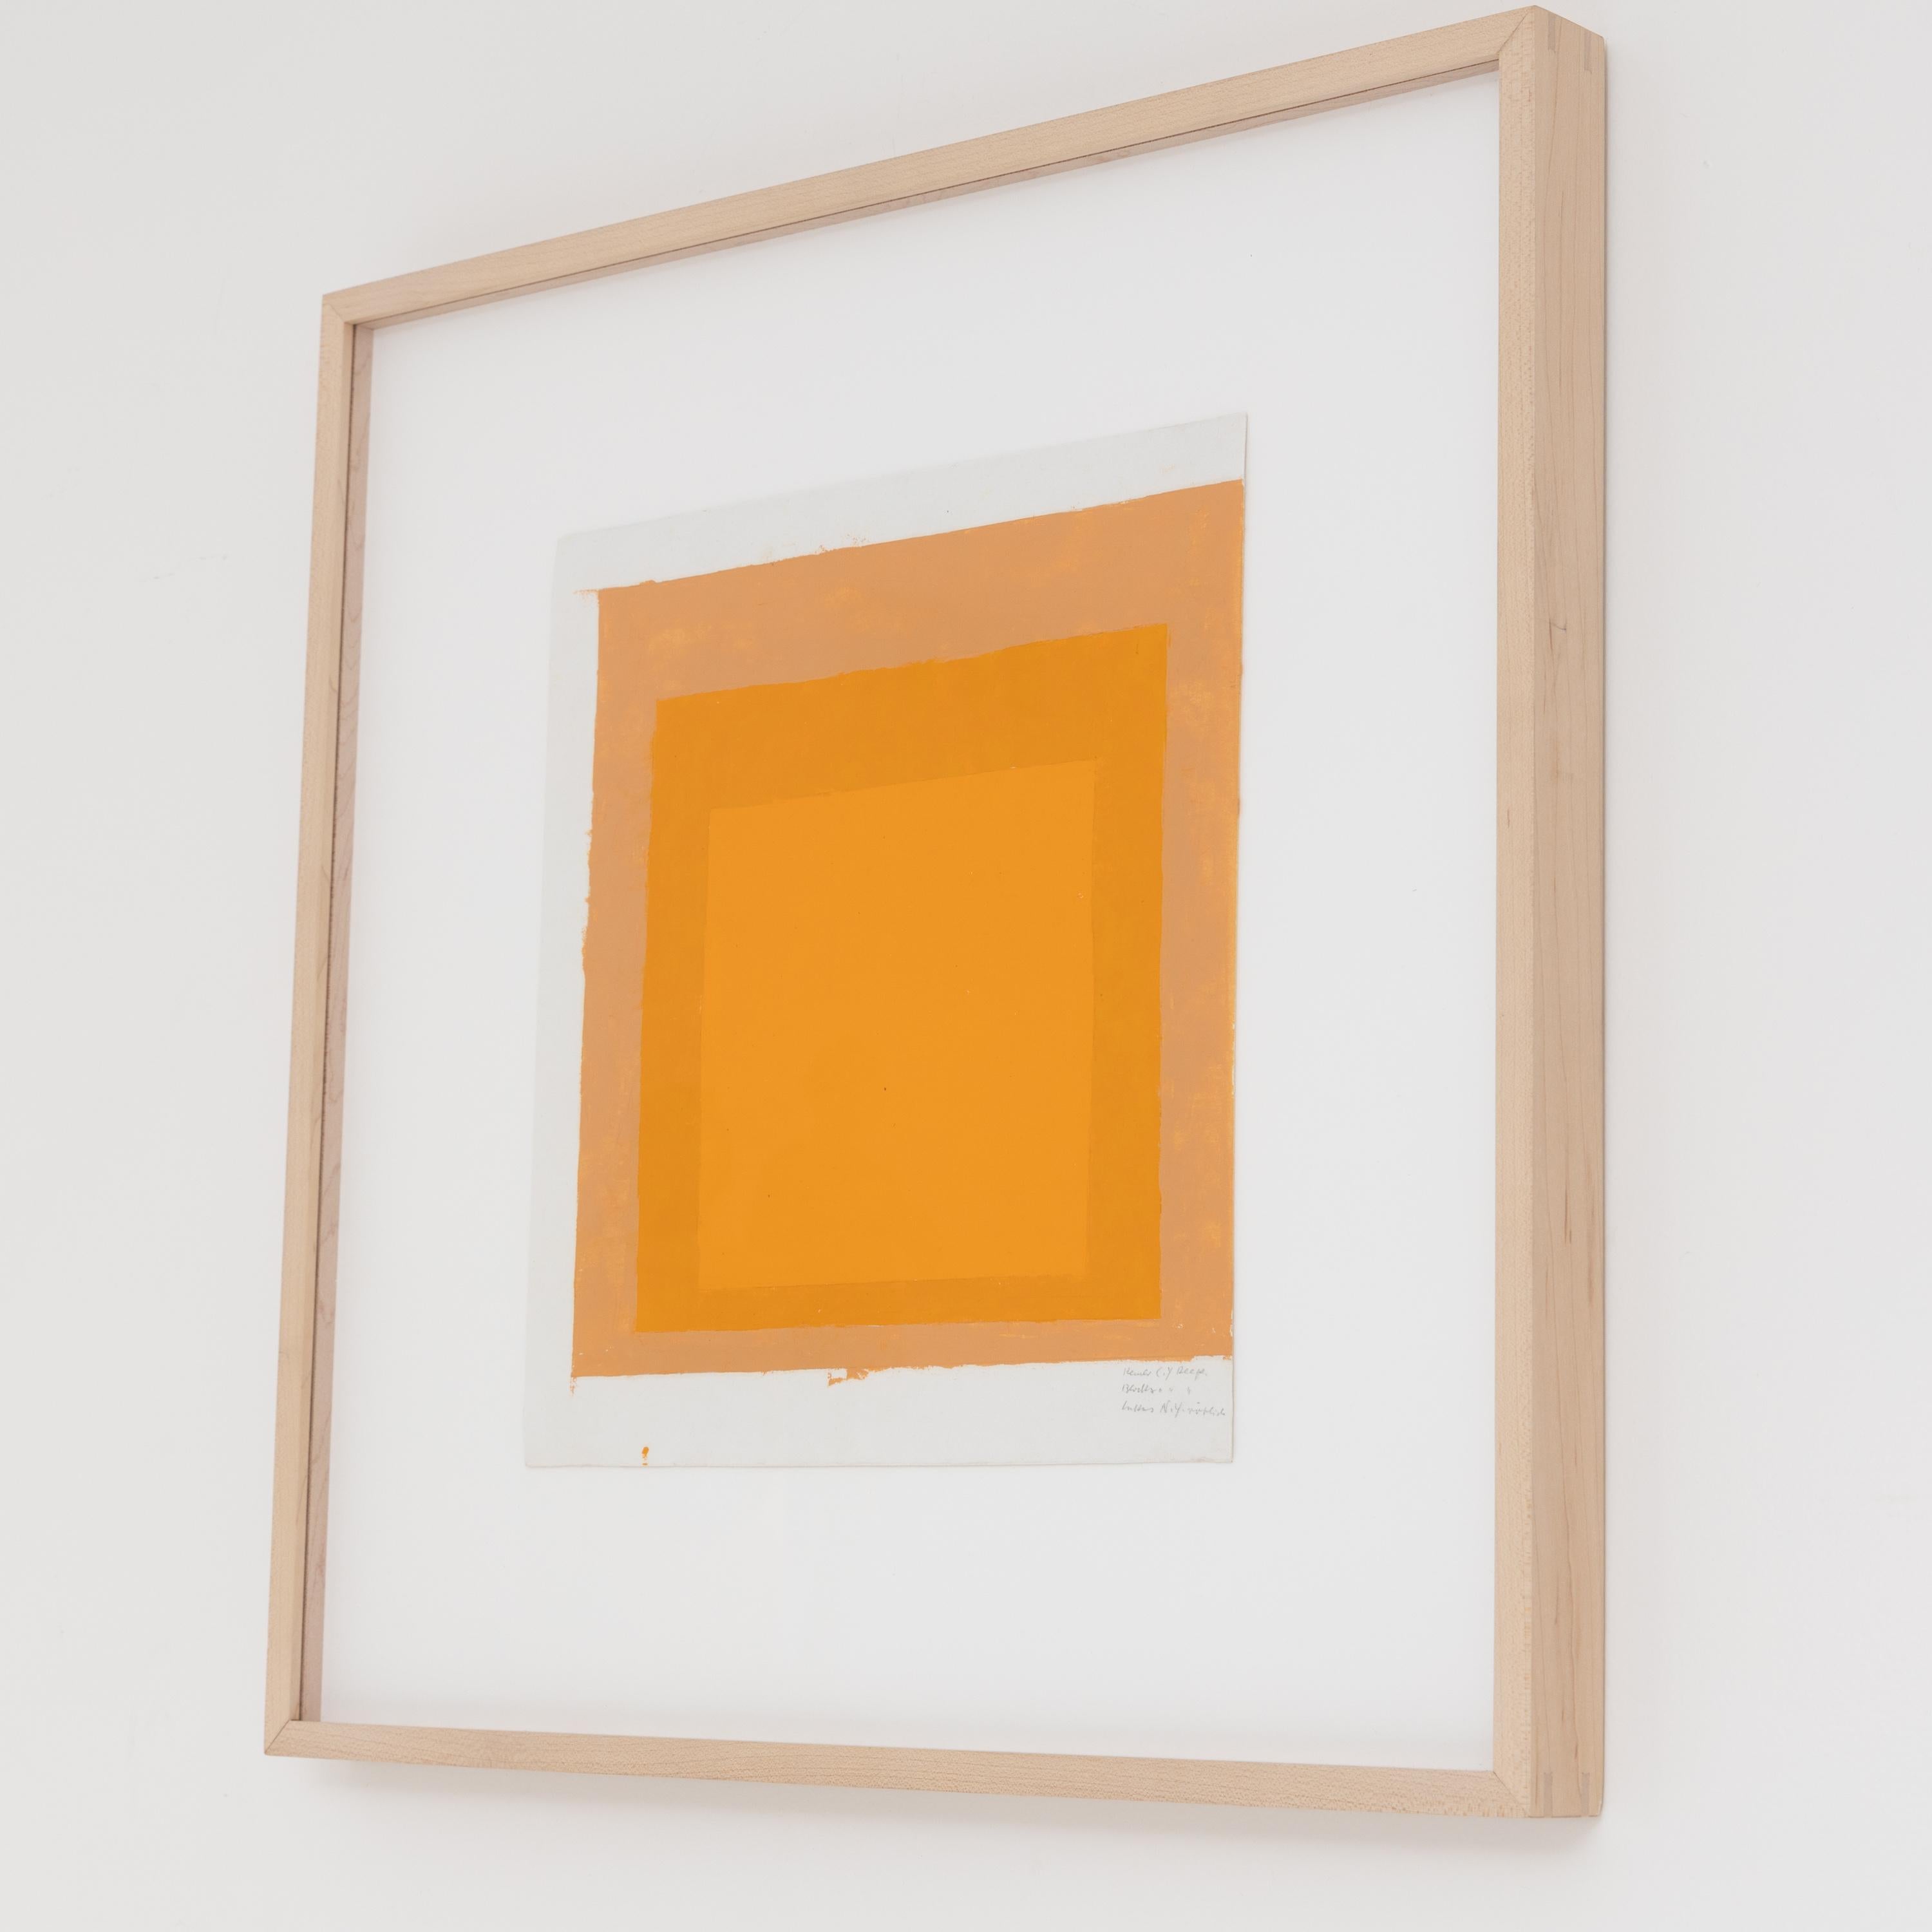 Josef Albers: Study on Homage to the Square, without year (sixties) 1